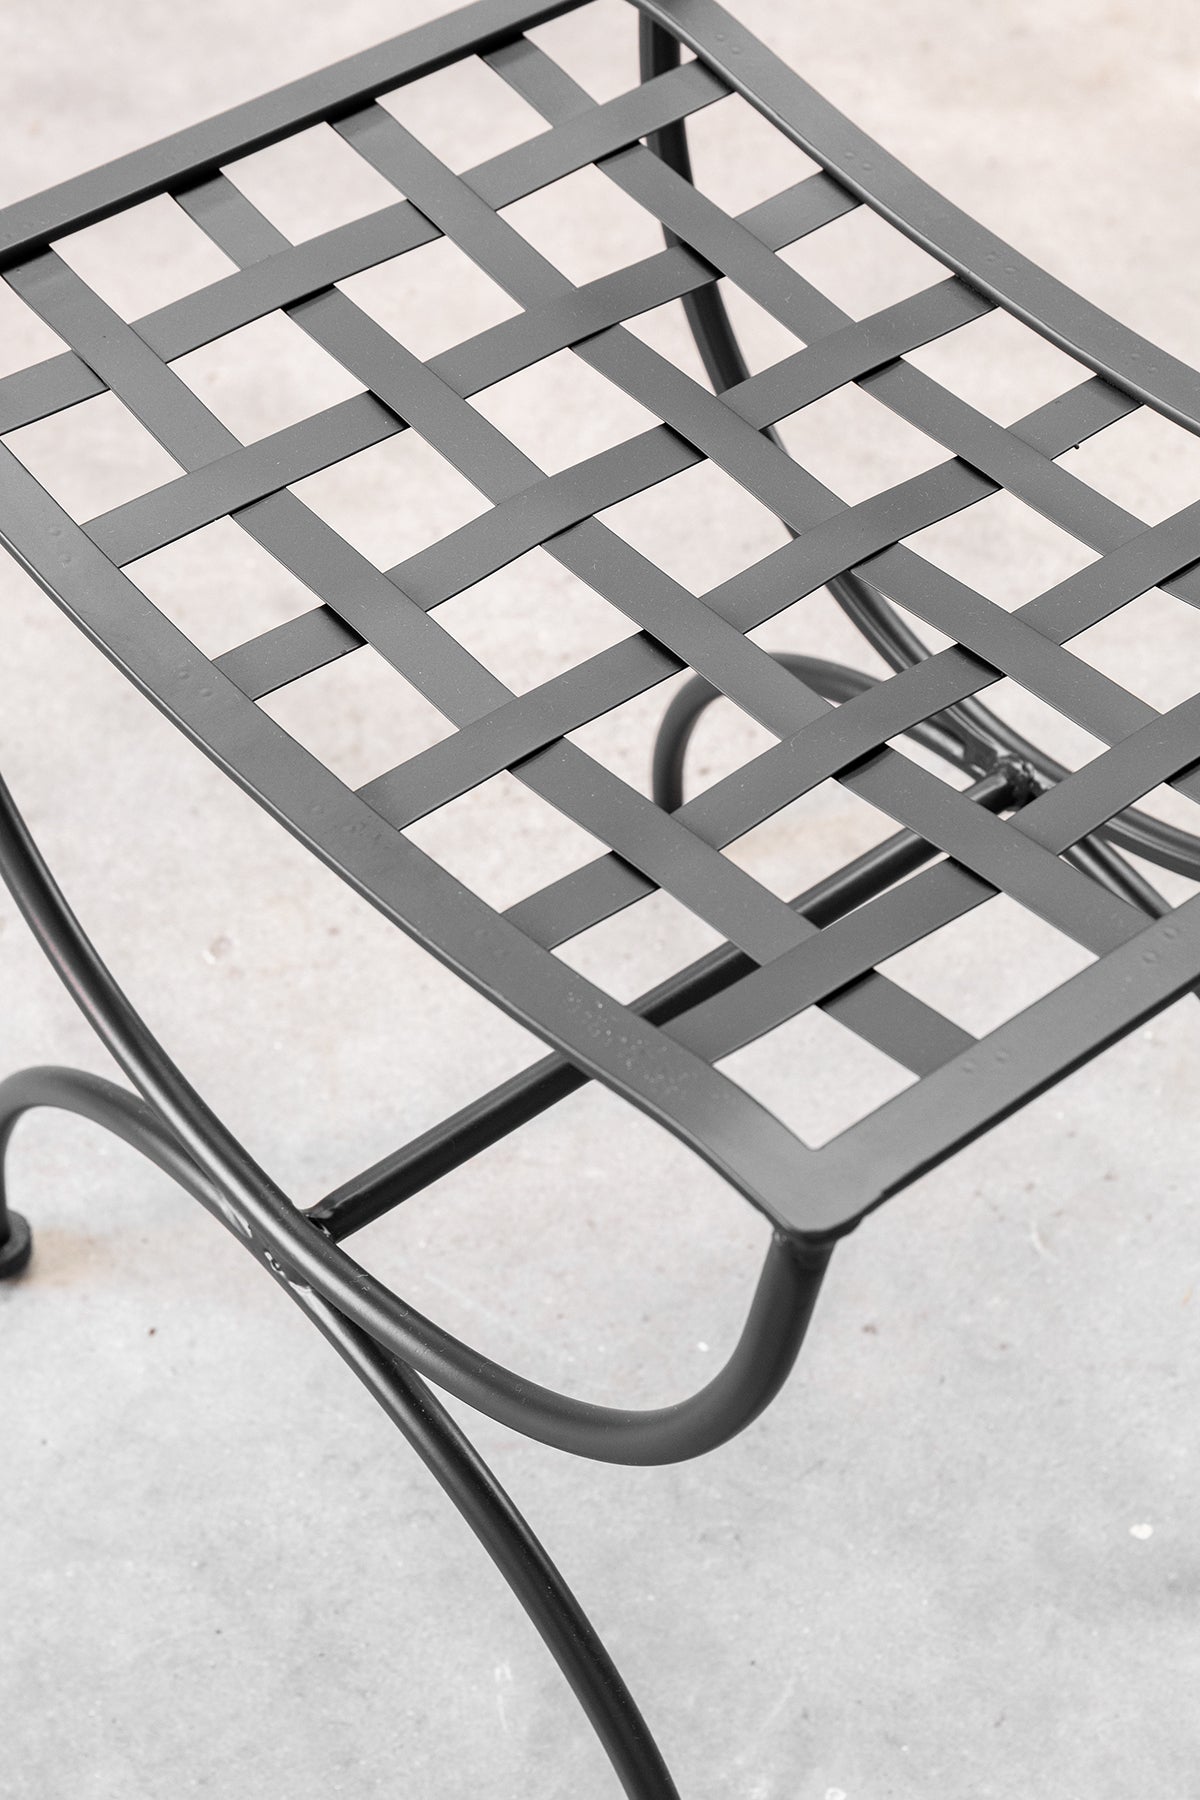 French Iron Outdoor Chair (4 Available)